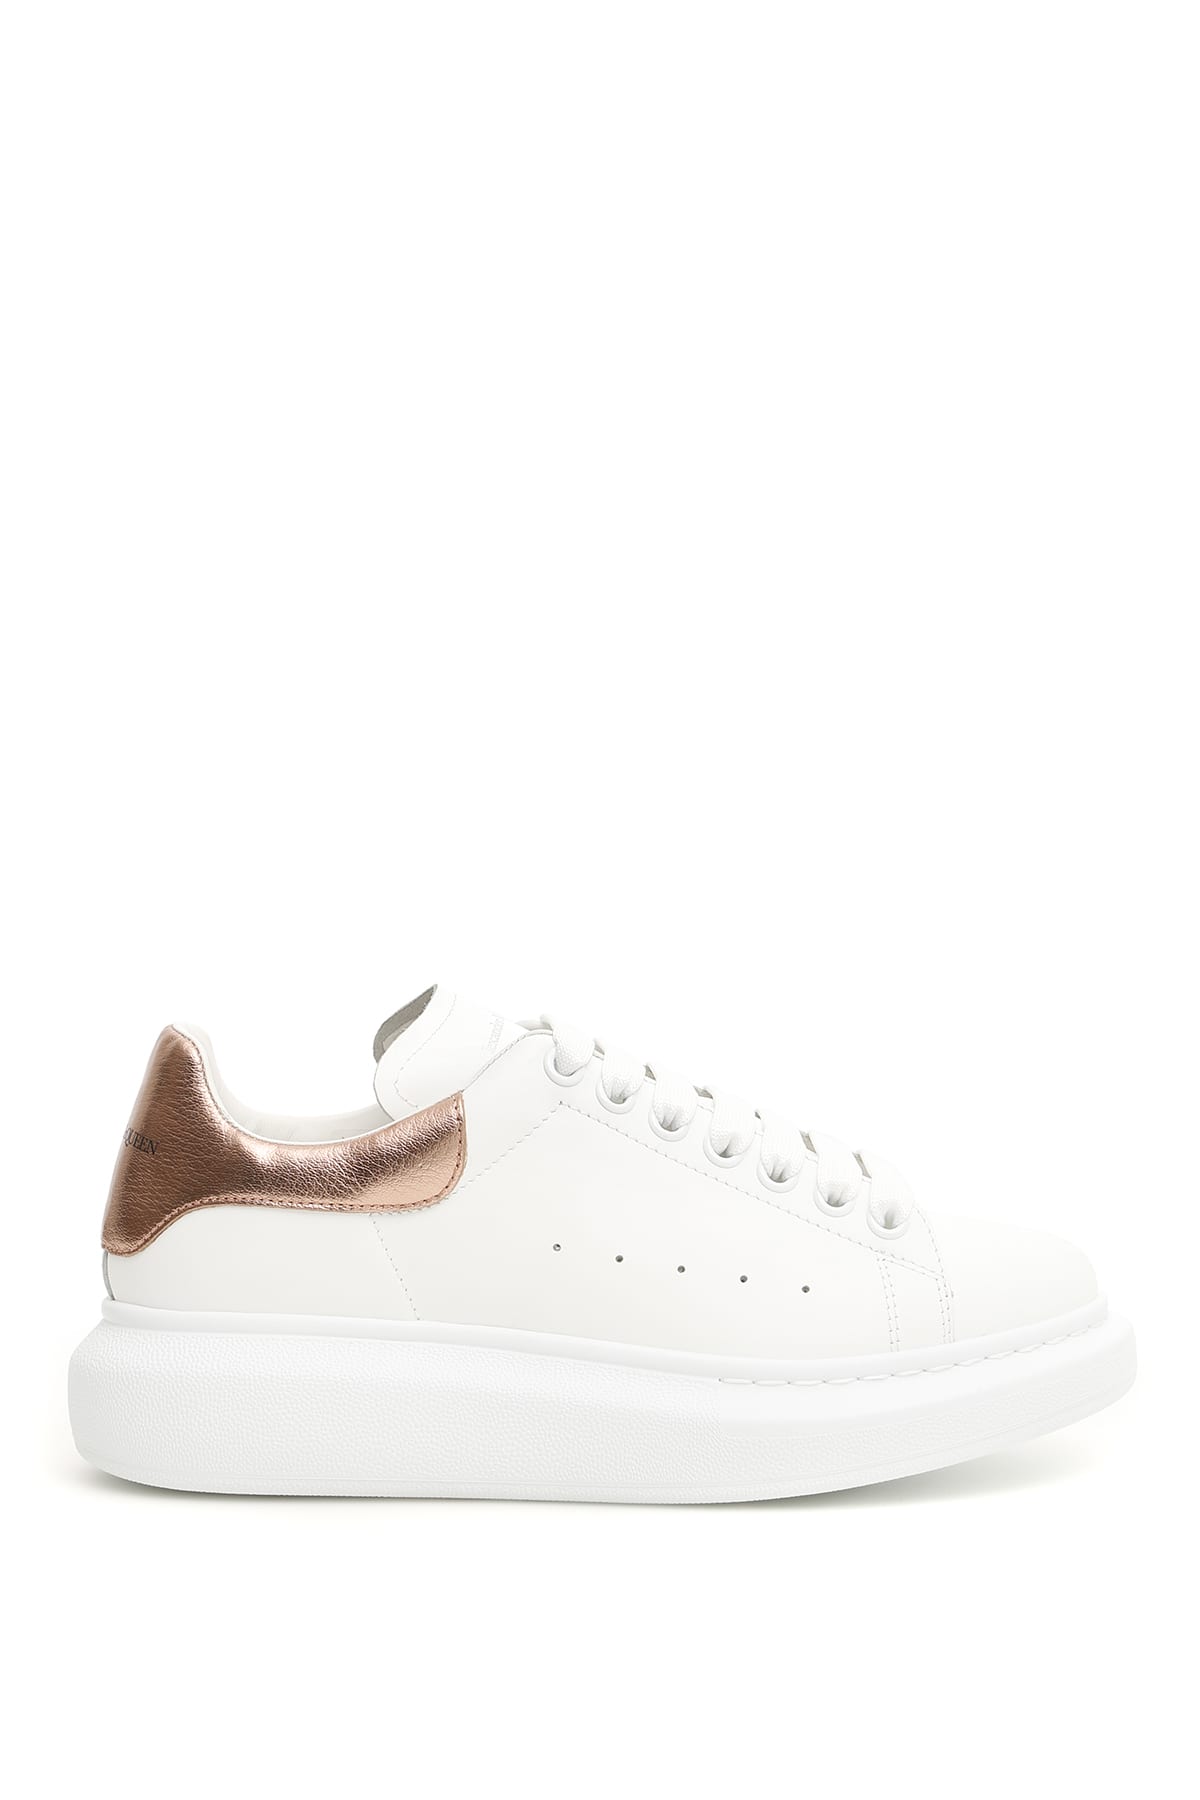 white and rose gold alexander mcqueen's